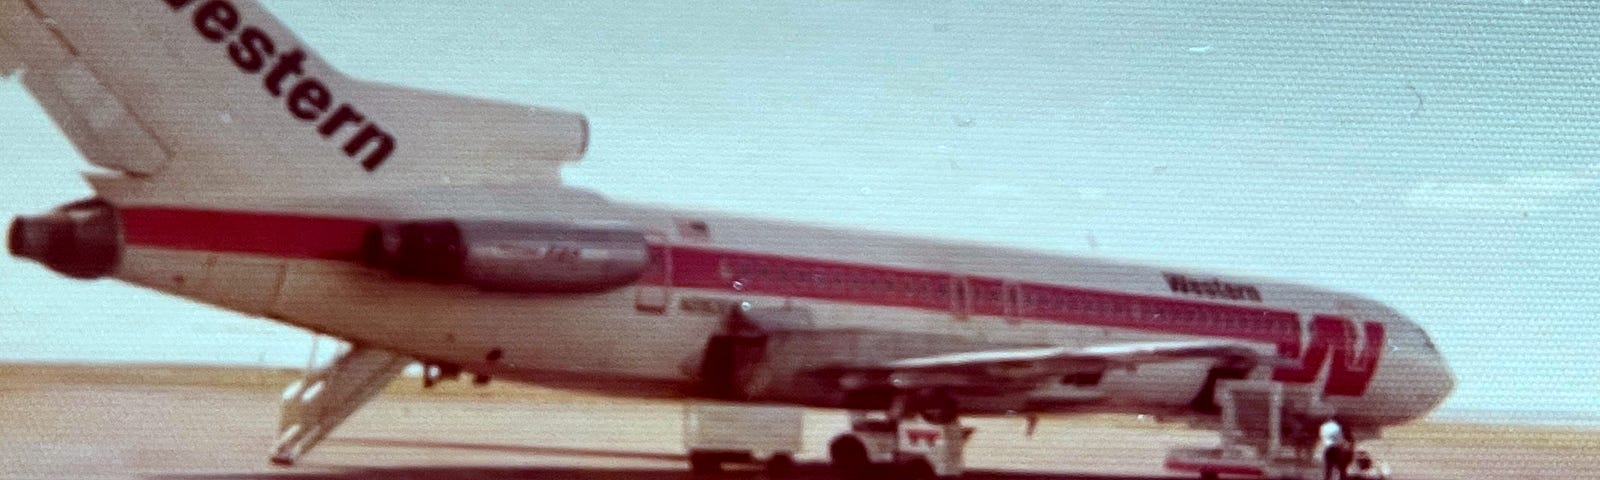 Western Airlines plane on a brown dusty tarmac — white with a red stripe down the side from a large W at the front. Black lettering on the tailfin says “Western”. There is a chain link fence in the foreground with a sign saying “Gates 2–3”